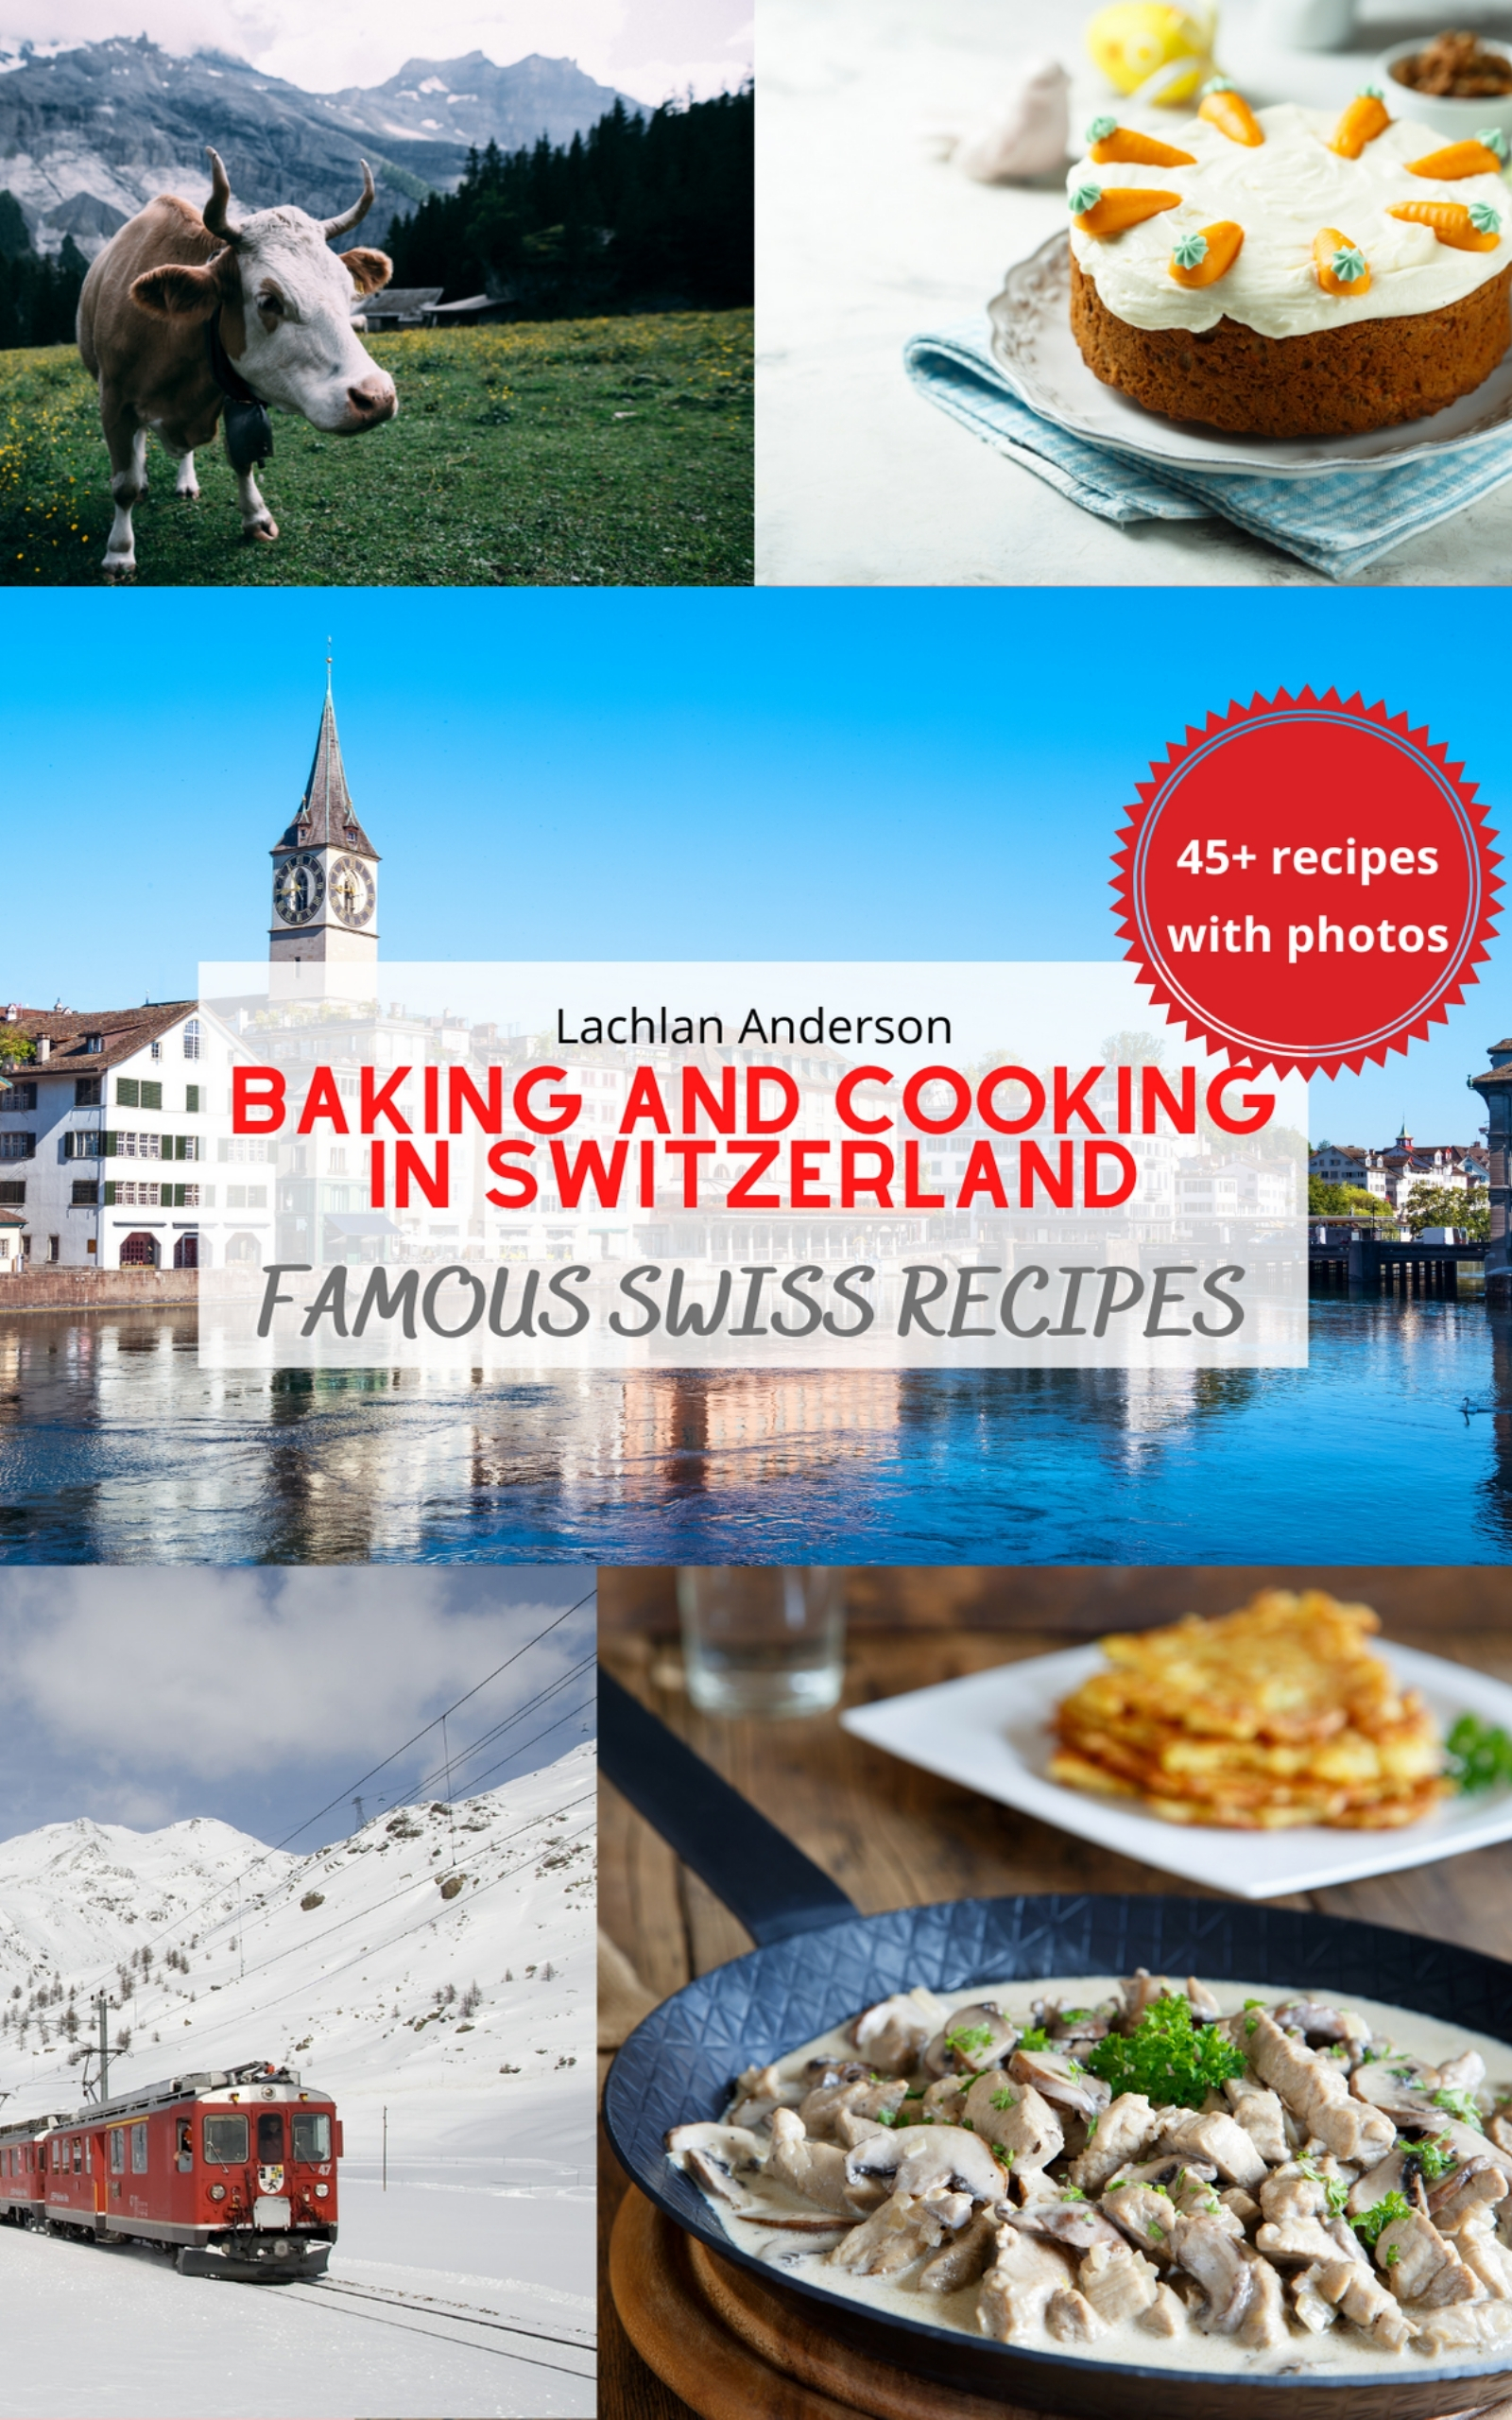 FREE: Baking and Cooking in Switzerland: Famous Swiss Recipes by Lachlan Anderson